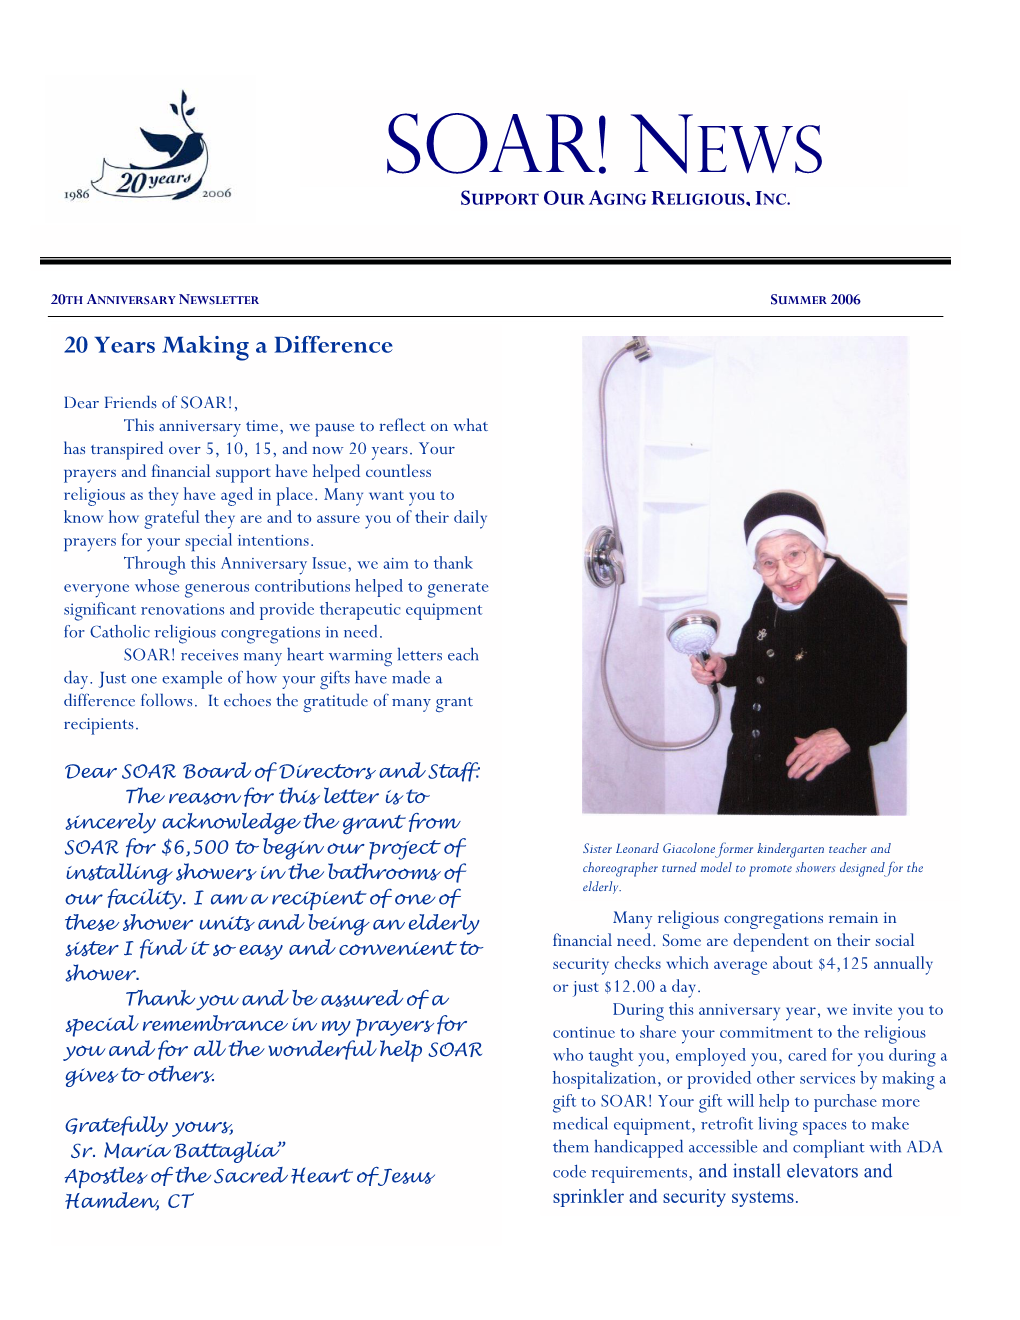 Soar! News Support Our Aging Religious, Inc